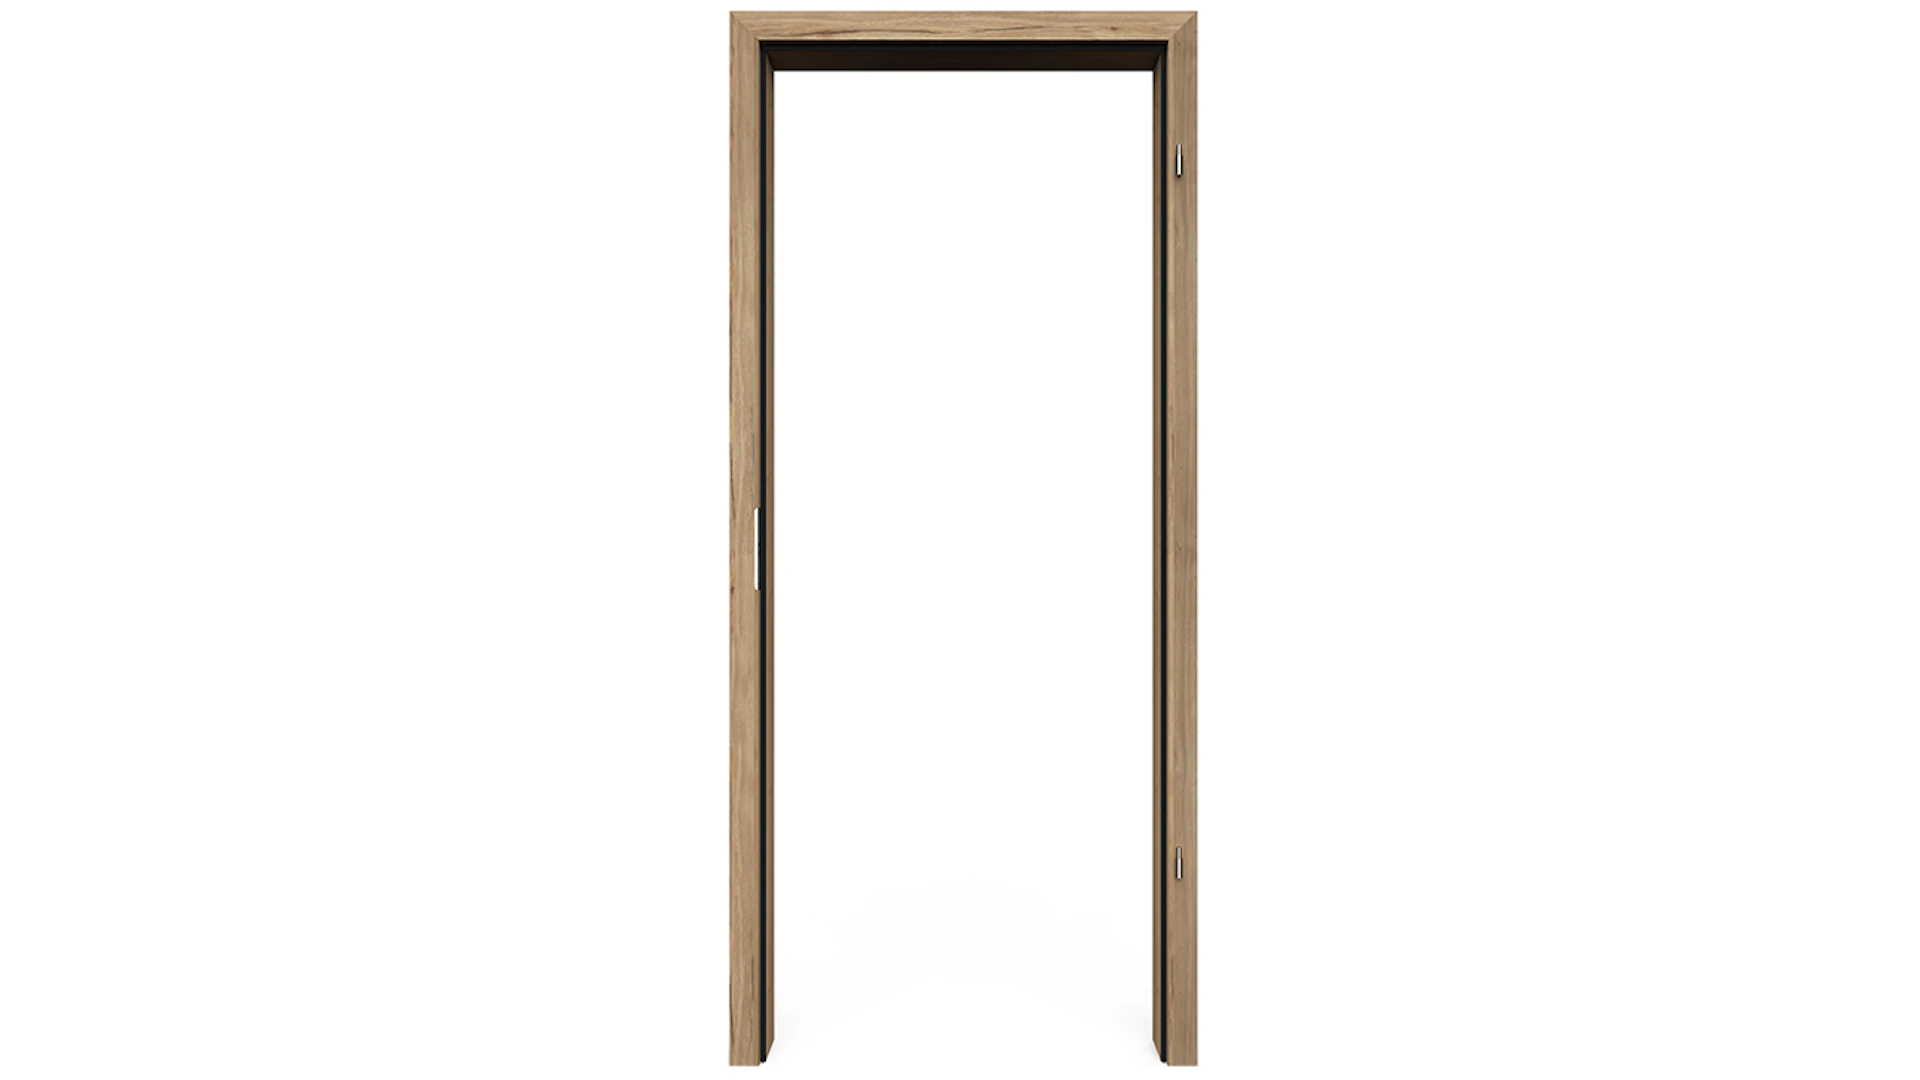 planeo Standard Door frame Rounded edge - CPL Oak Vintage - 1985 x 610 x 140 mm DIN right